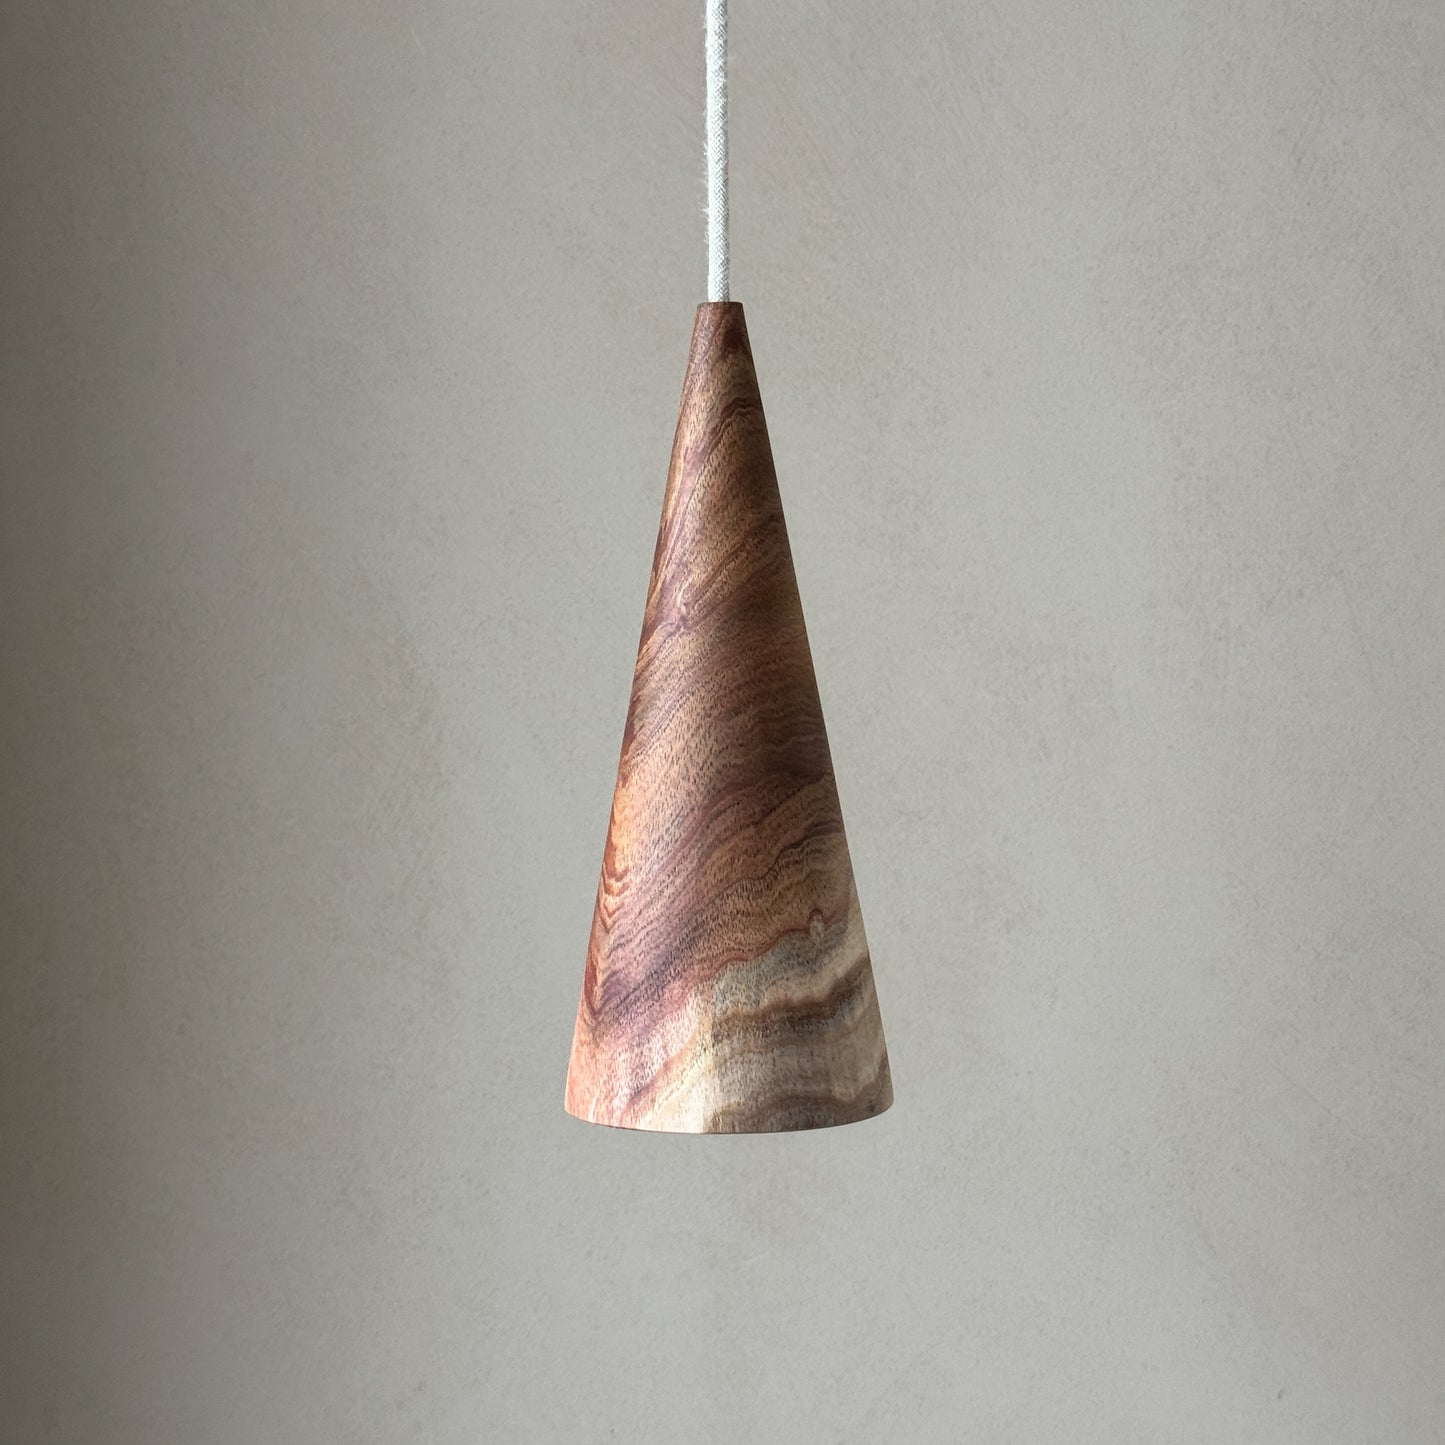 "There is no light without shadow" | Ceiling Conical Lamp